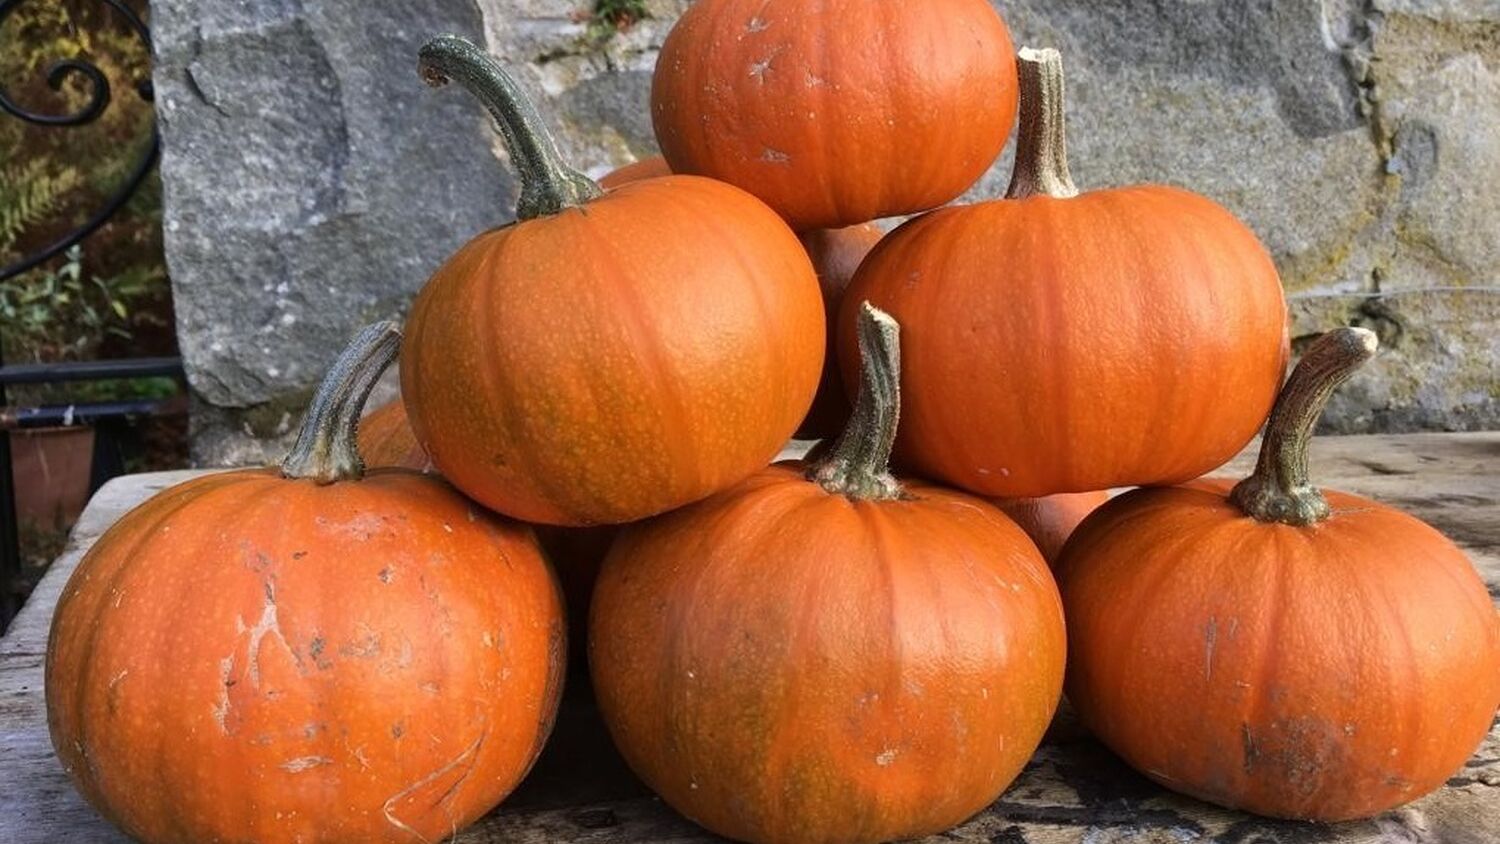 A pyramid of pumpkins is displayed on wooden boards in front of a grey stone wall.